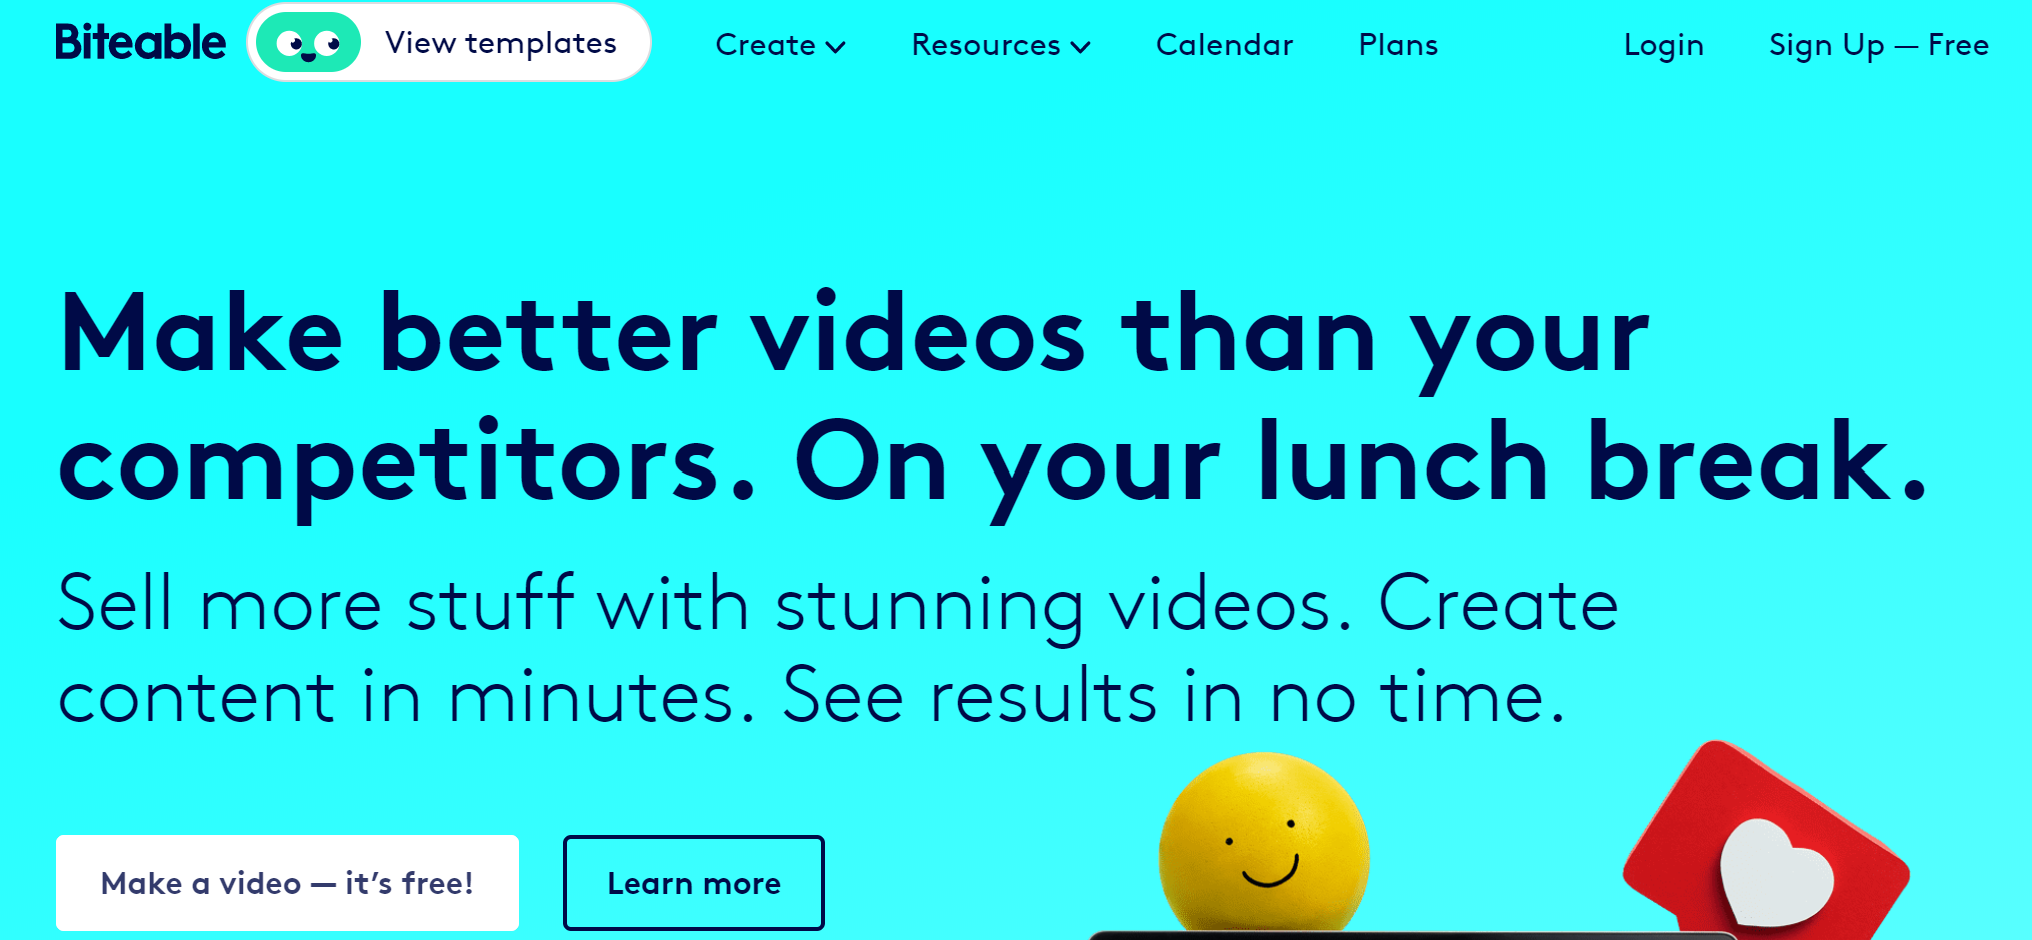 5-biteable-online-video-editor